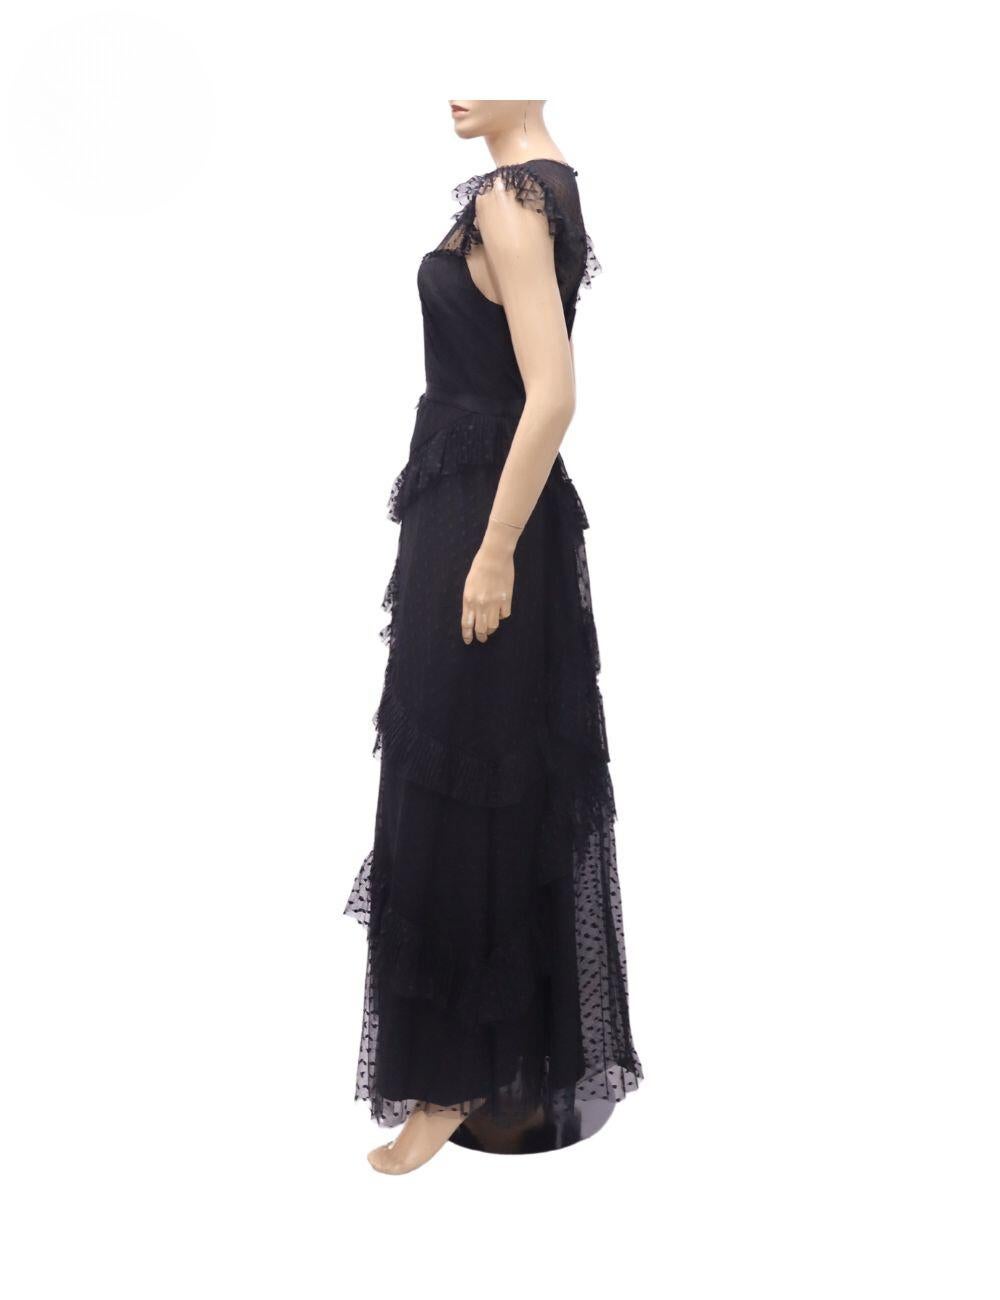 BCBG Maxazria Sweetheart Neckline Maxi Dress, Features mesh accents, polka dots and a zip closure at back.

Material: 100% Nylon
Size: US 10 / M
Bust: 95cm
Waist: 76cm
Hip: 102
Overall Condition: Excellent